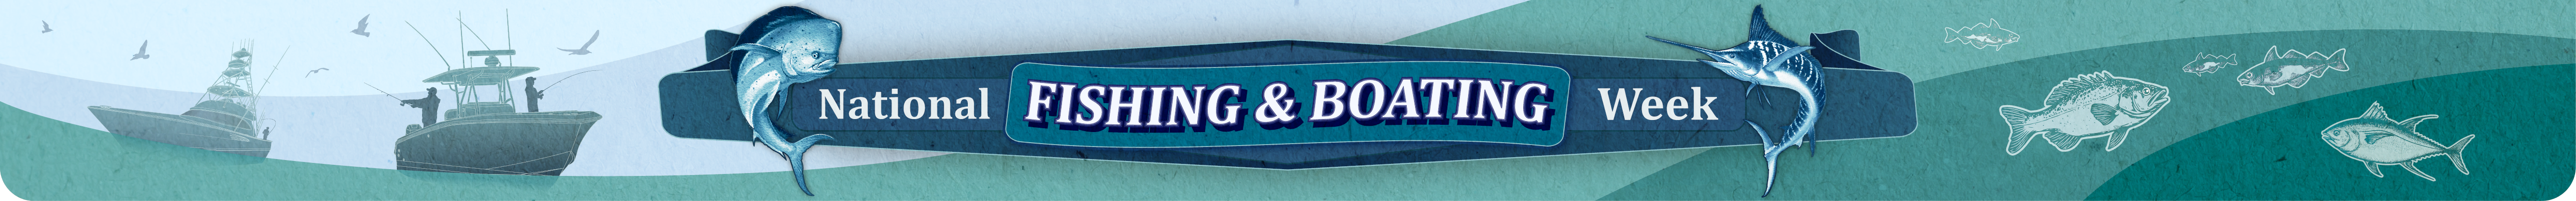 Banner image for National Fishing & Boating Week with illustrations of boats, fish, and seagulls in the background.